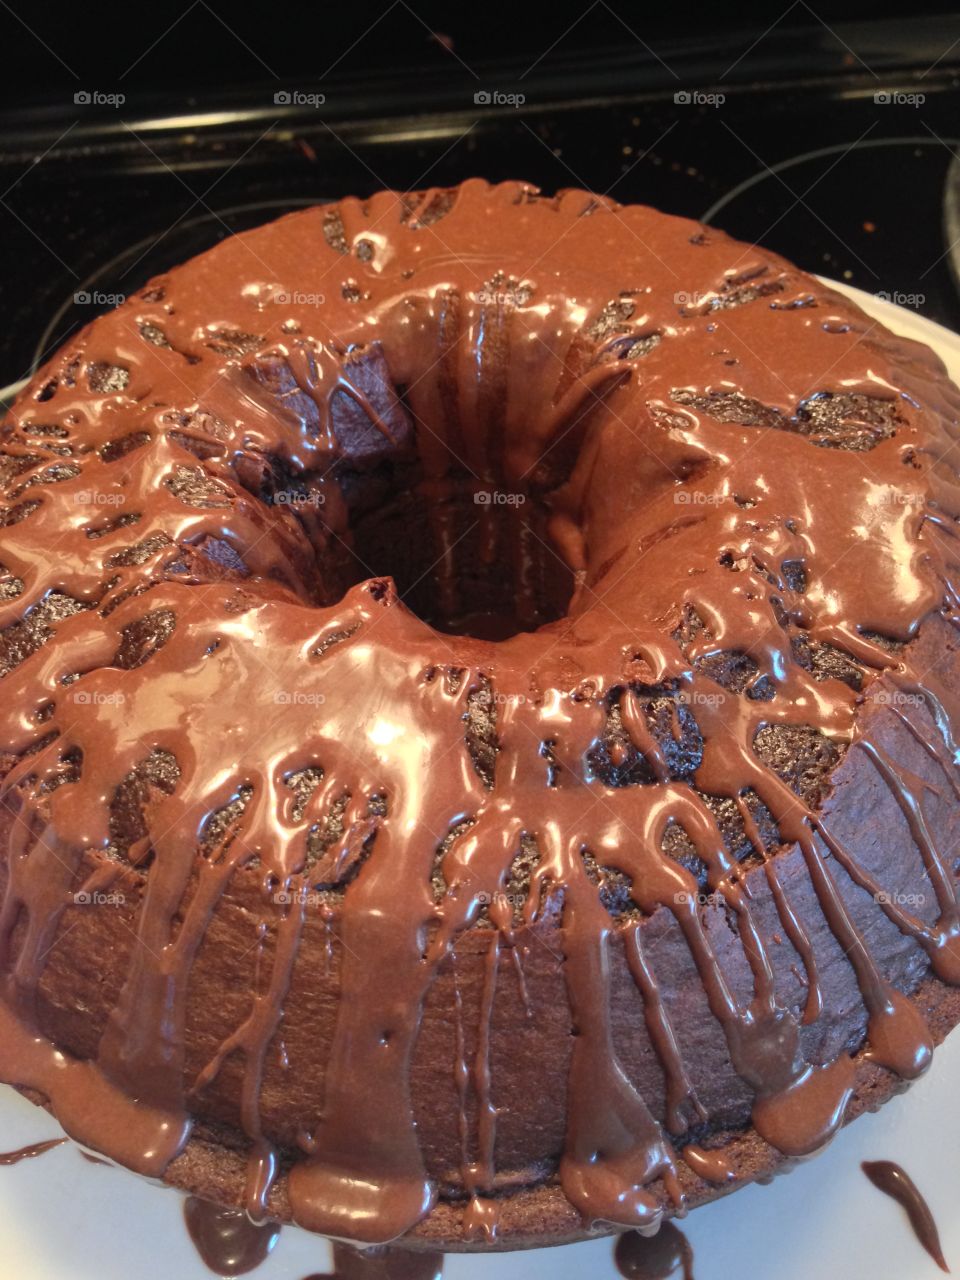 Made a devil's food cake in an angel food pan.  Whatever works! 